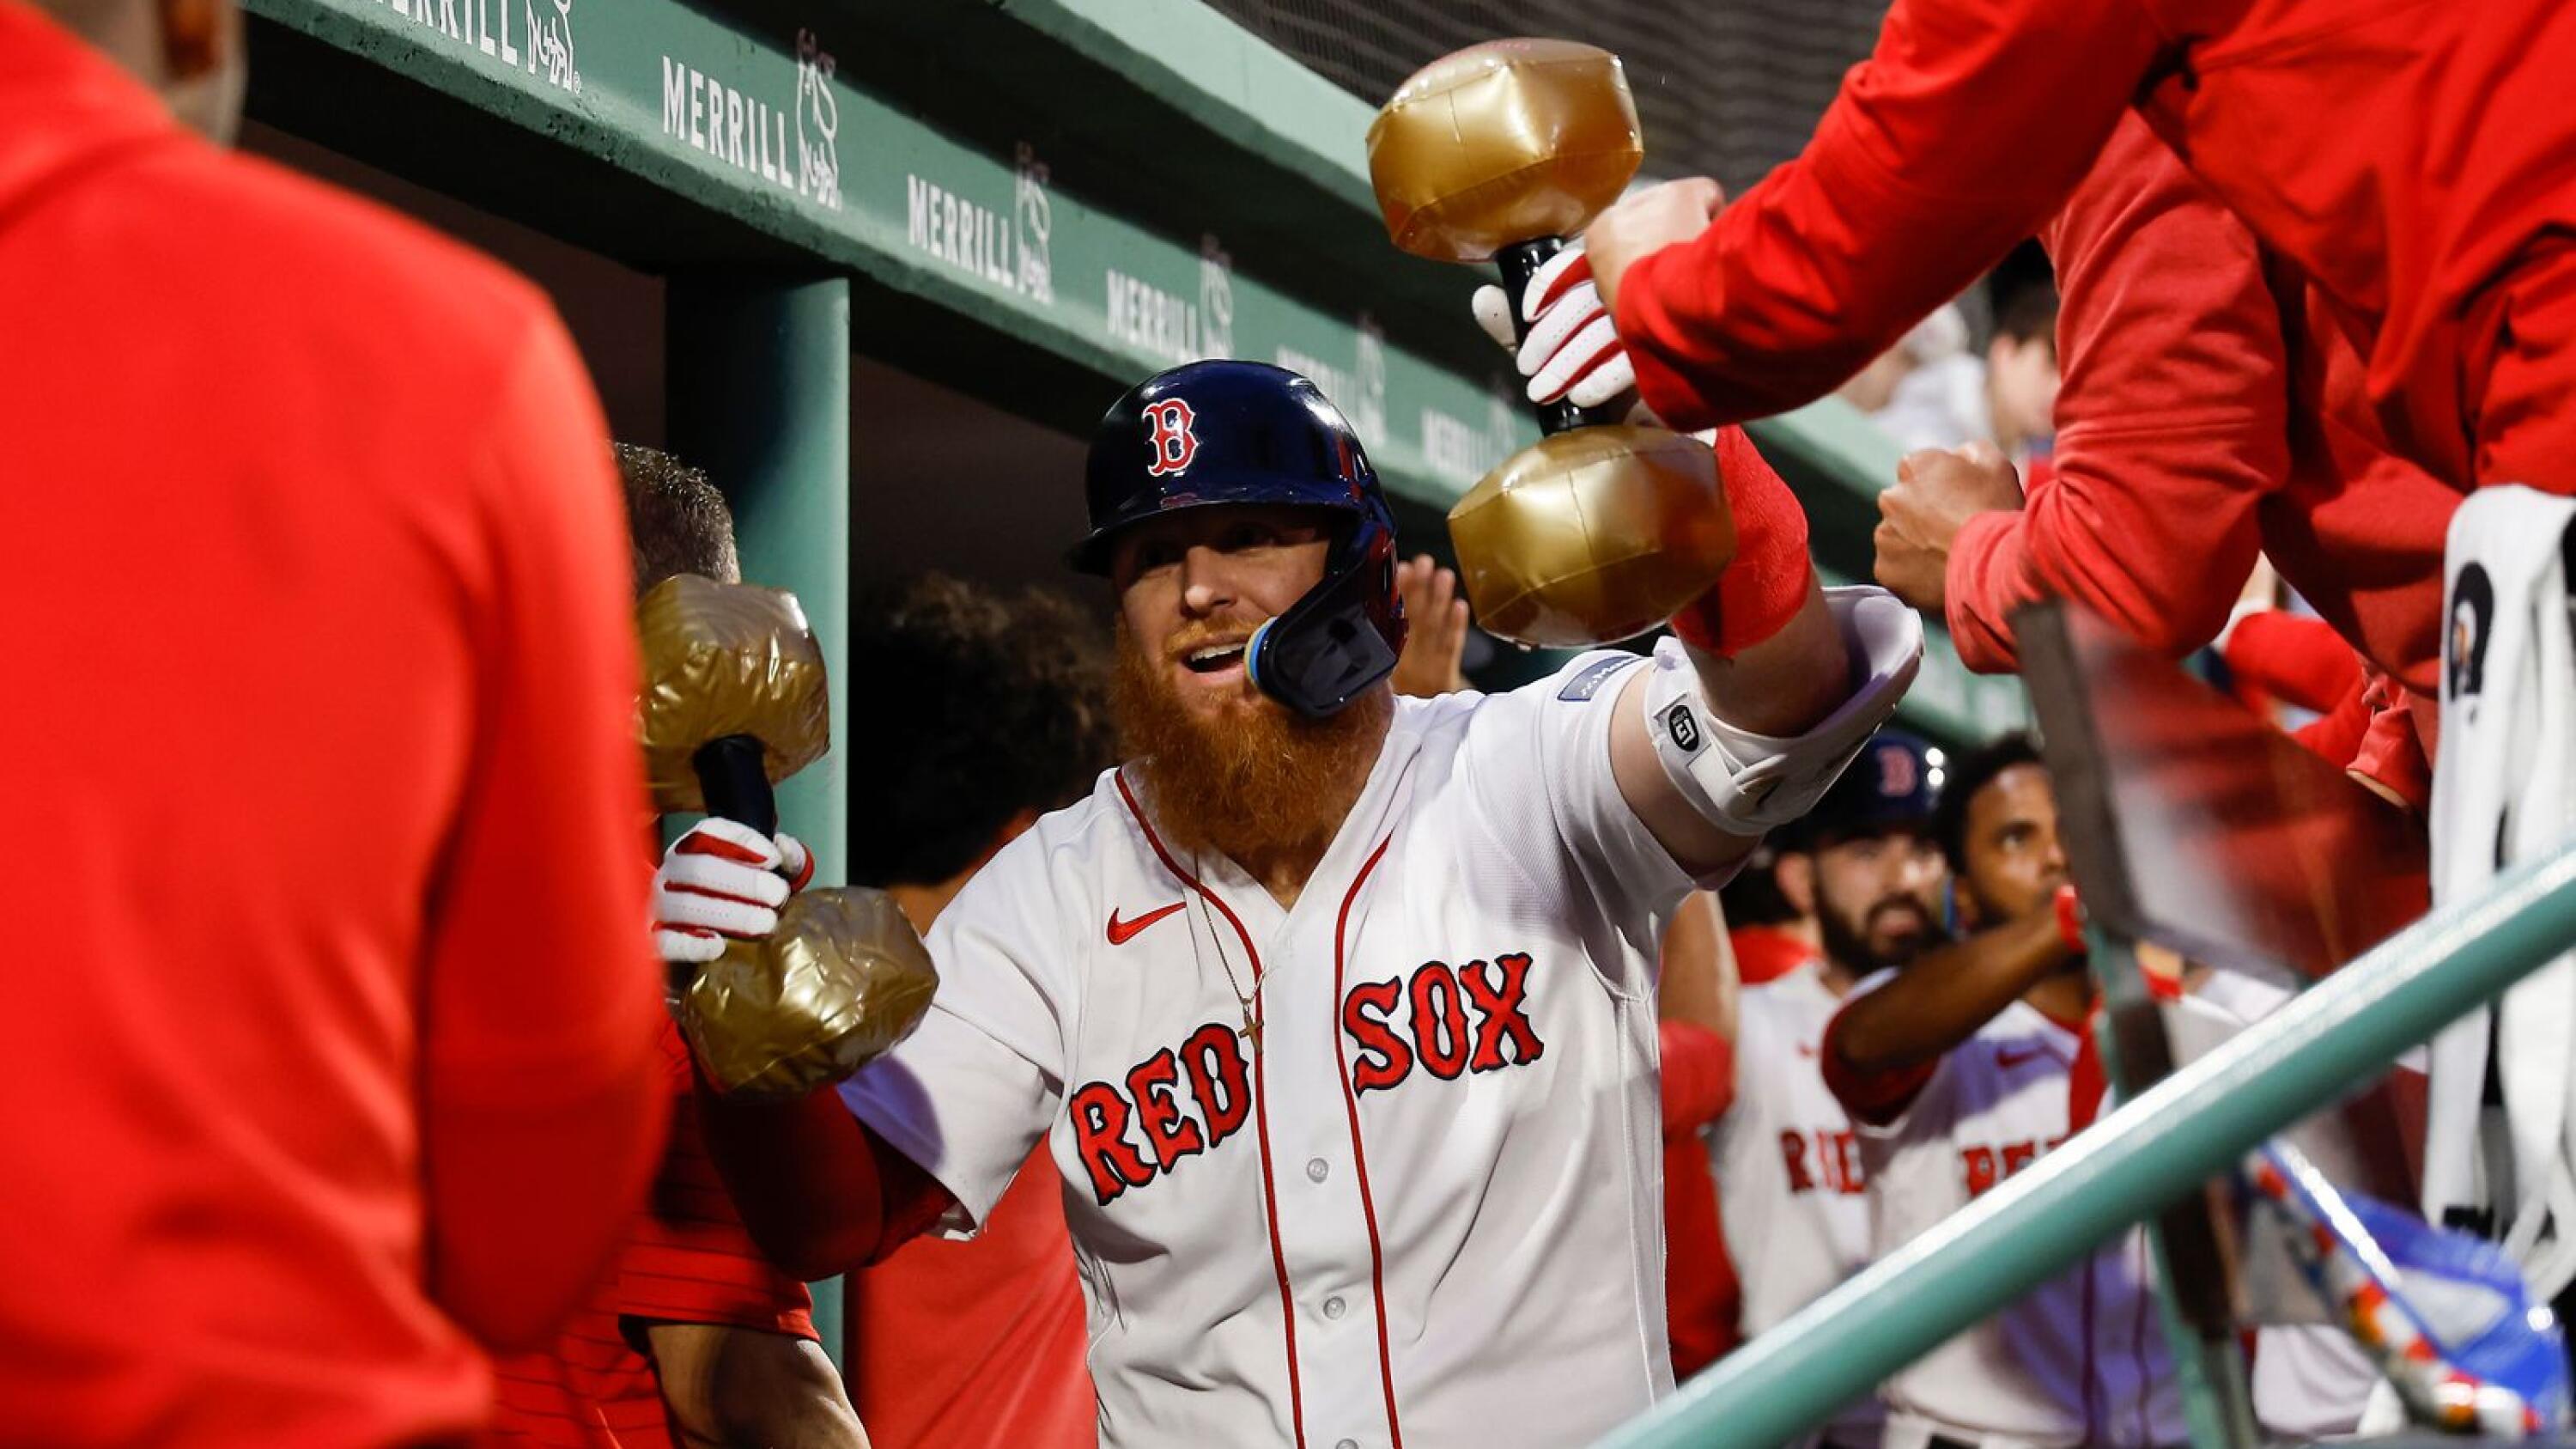 Turner homers twice, including grand slam, to help Red Sox rout rival  Yankees 15-5 at Fenway